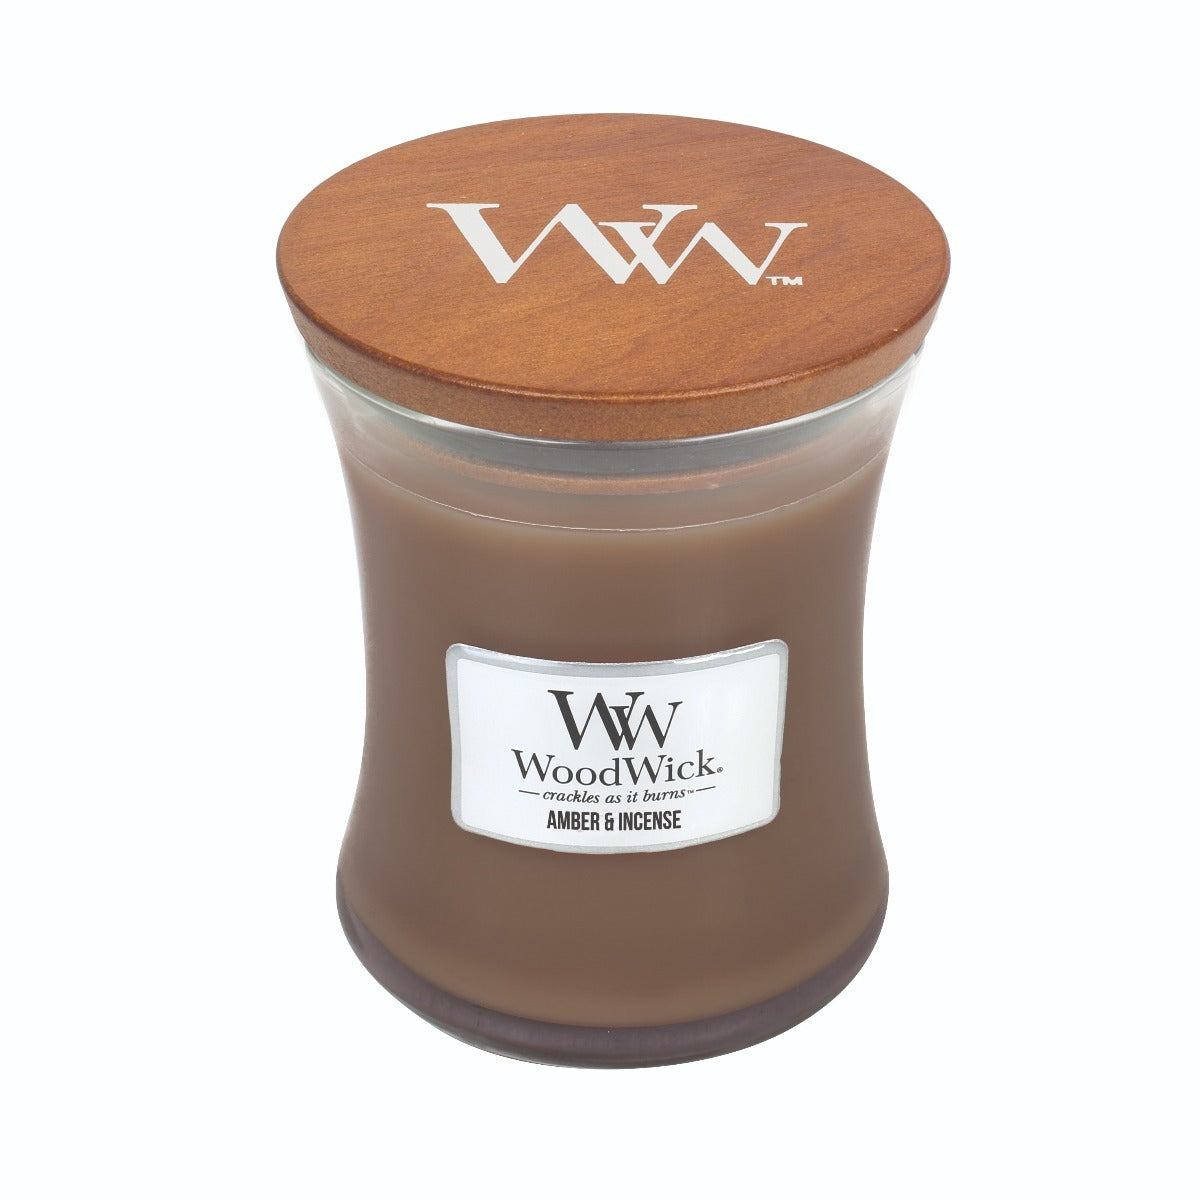 WOODWICK AMBER AND INCENSE MEDIUM - Gifts R Us